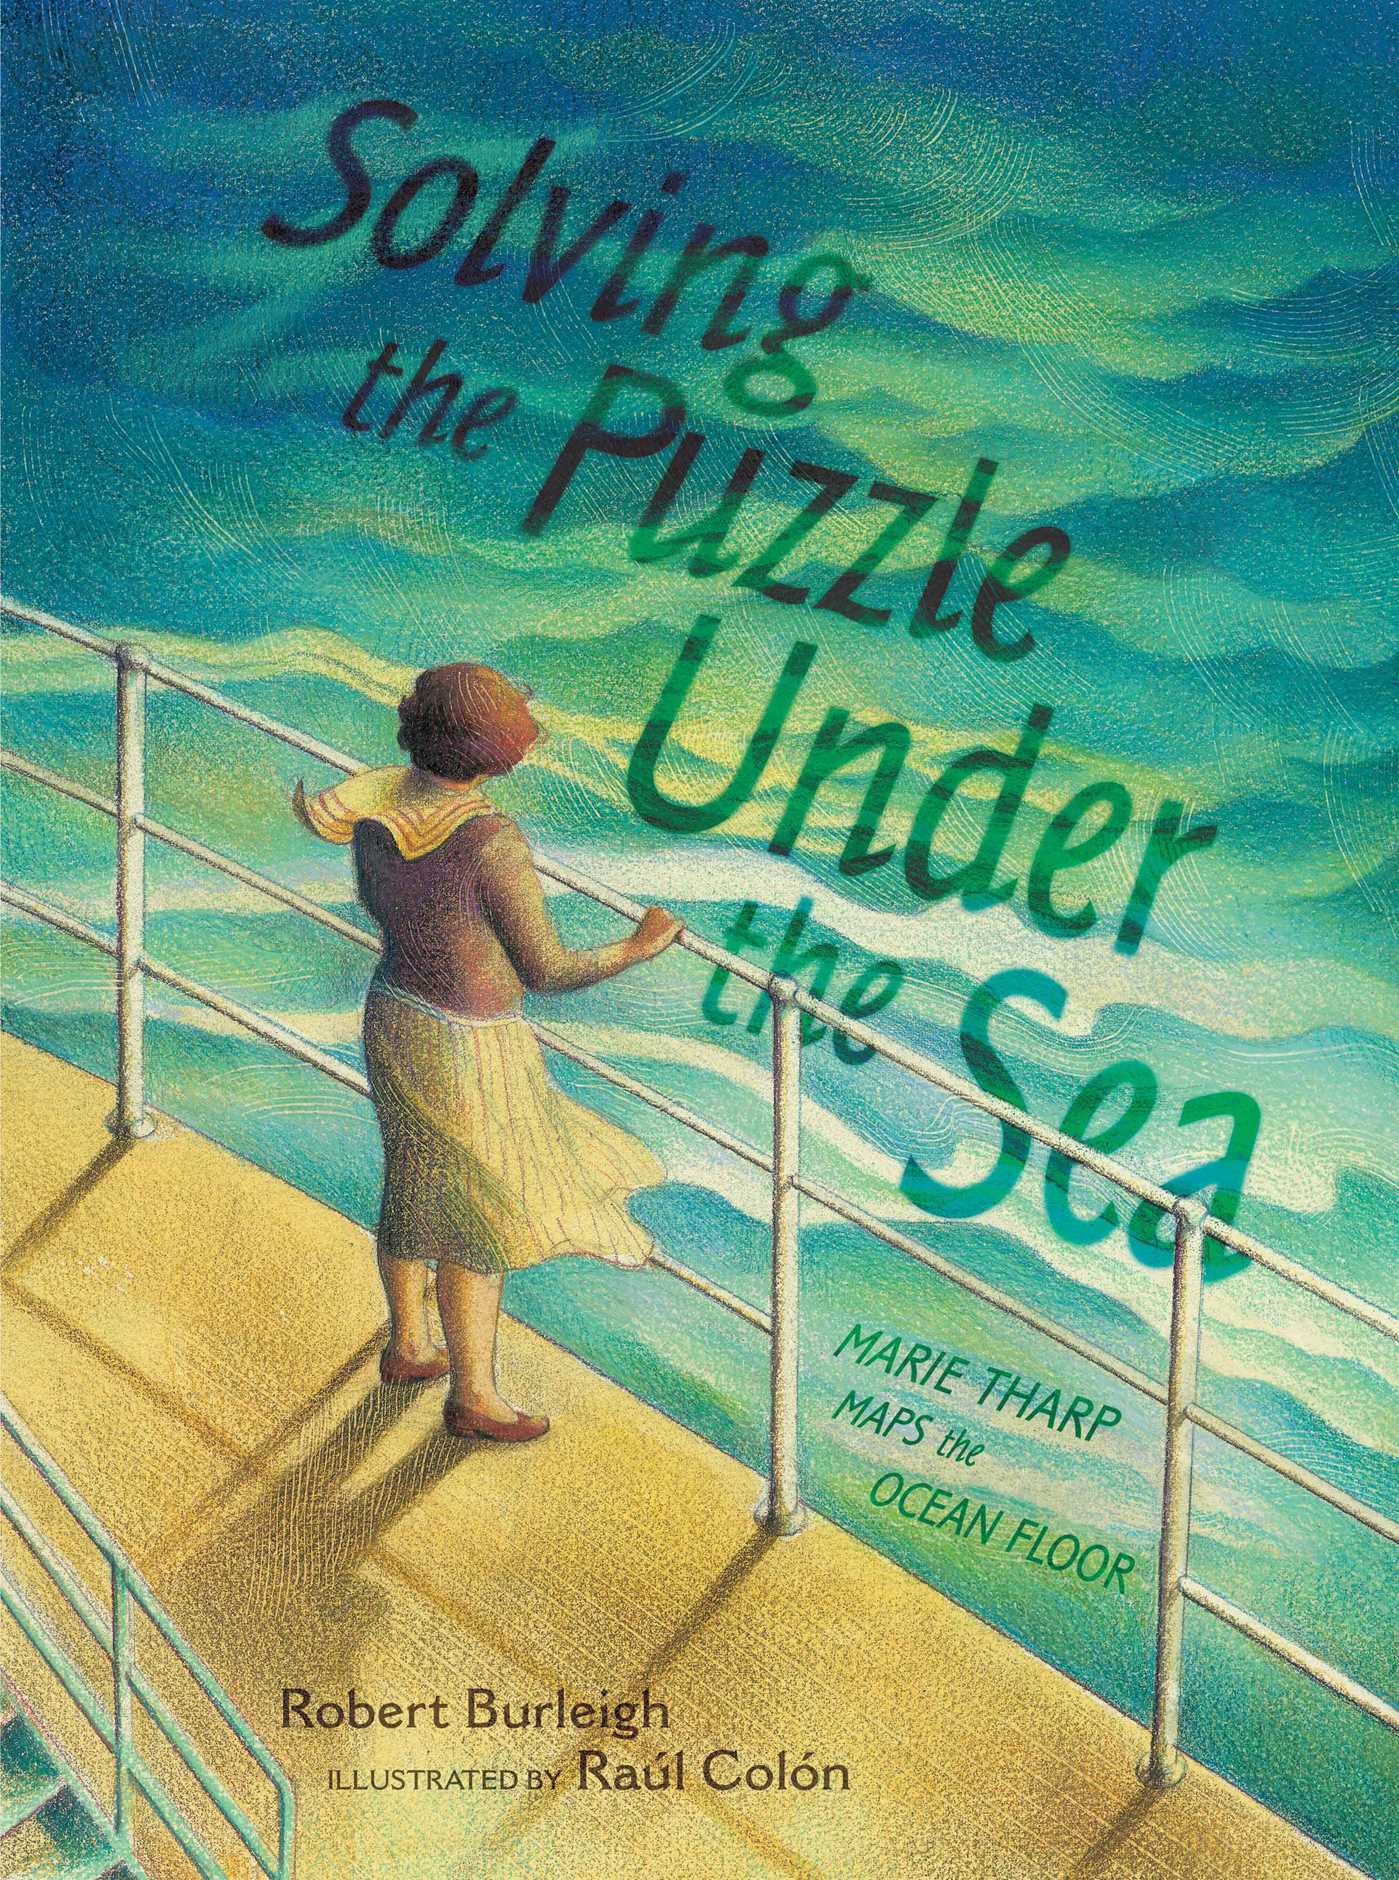 Solving the Puzzle Under the Sea | Book by Robert Burleigh, Raúl ...